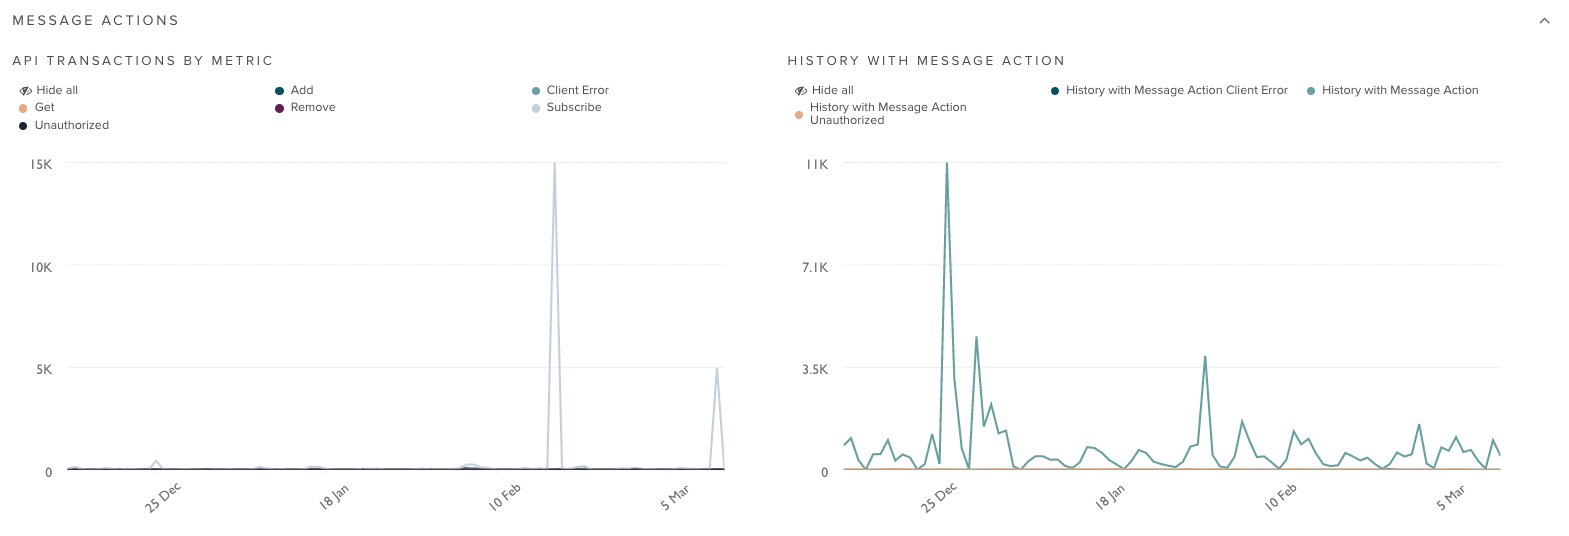 Message actions dashboard